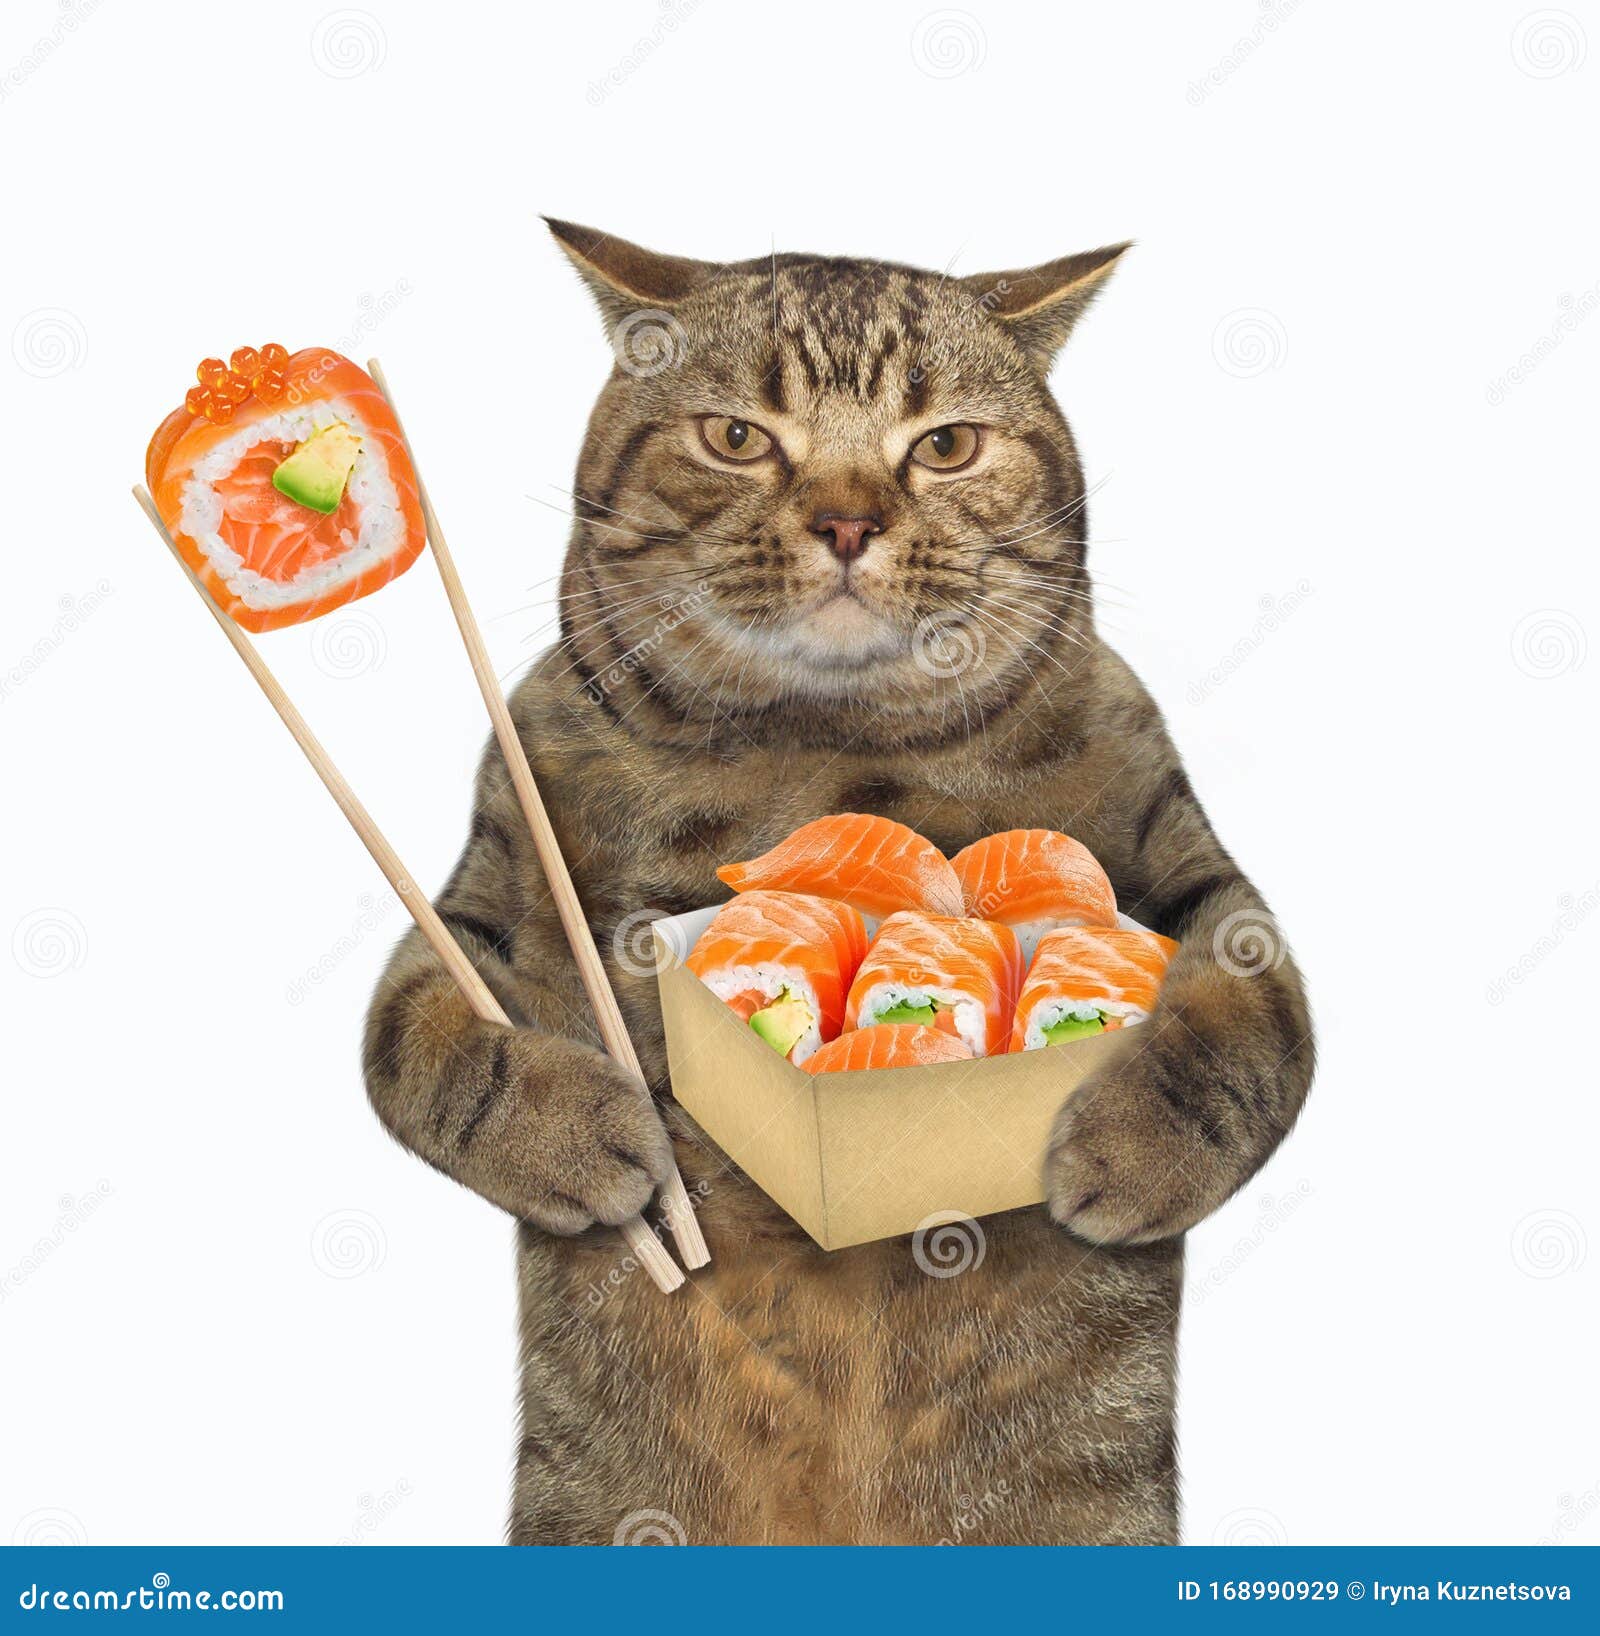 can dogs and cats eat sushi